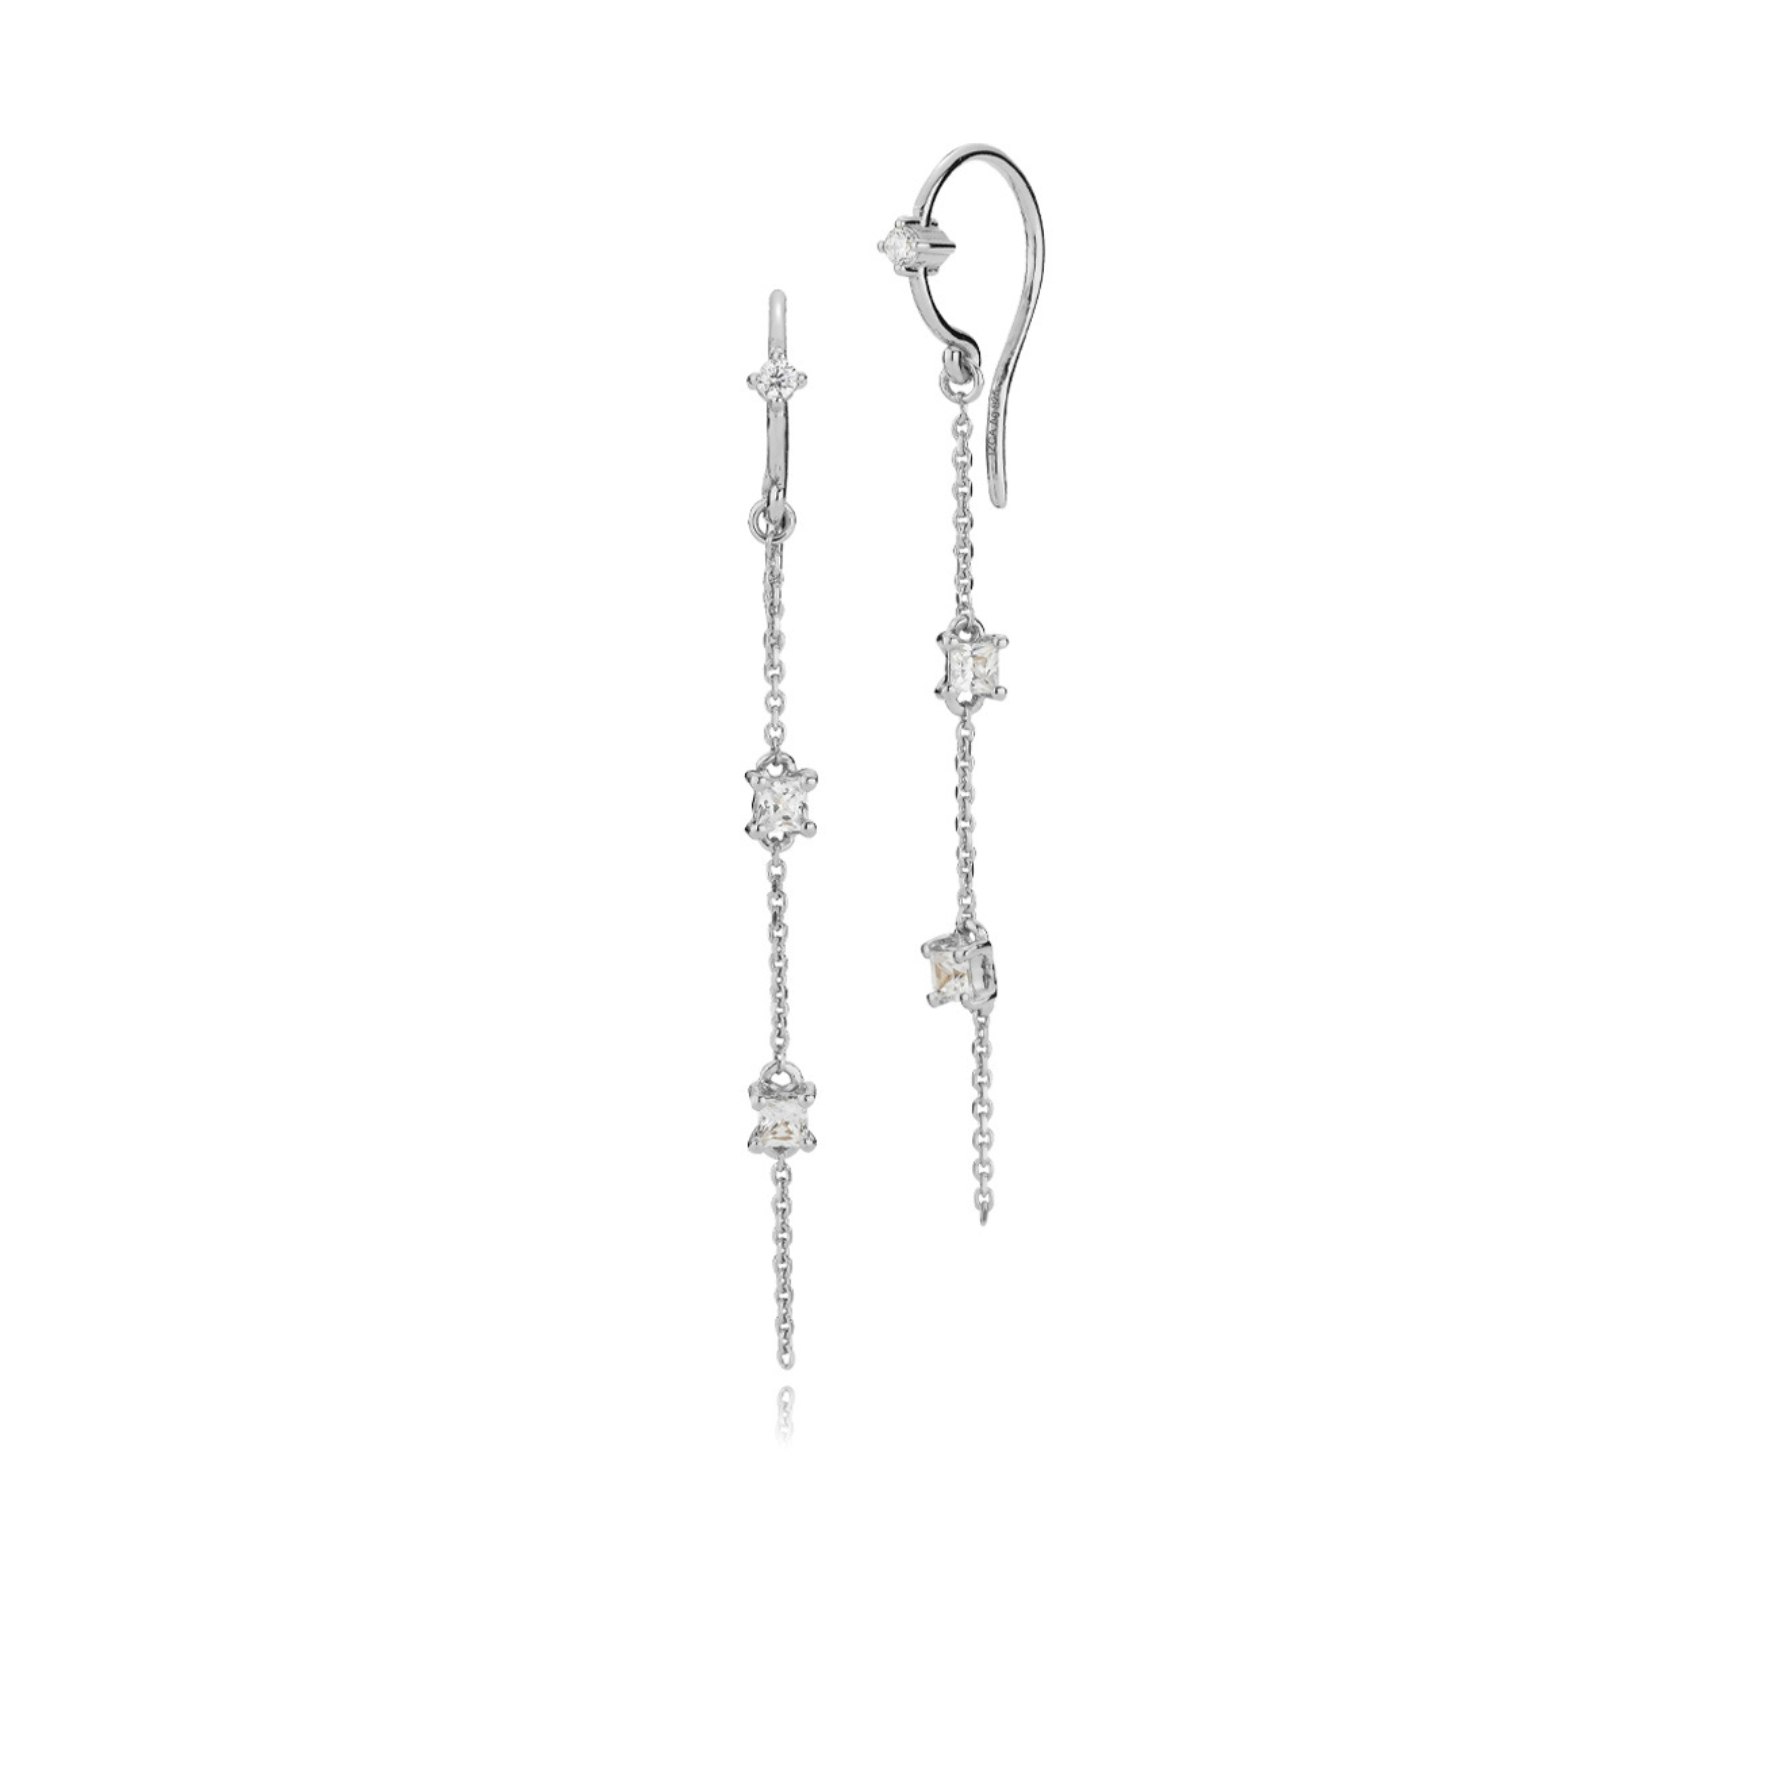 Angelina Chain Earrings von Izabel Camille in Silber Sterling 925